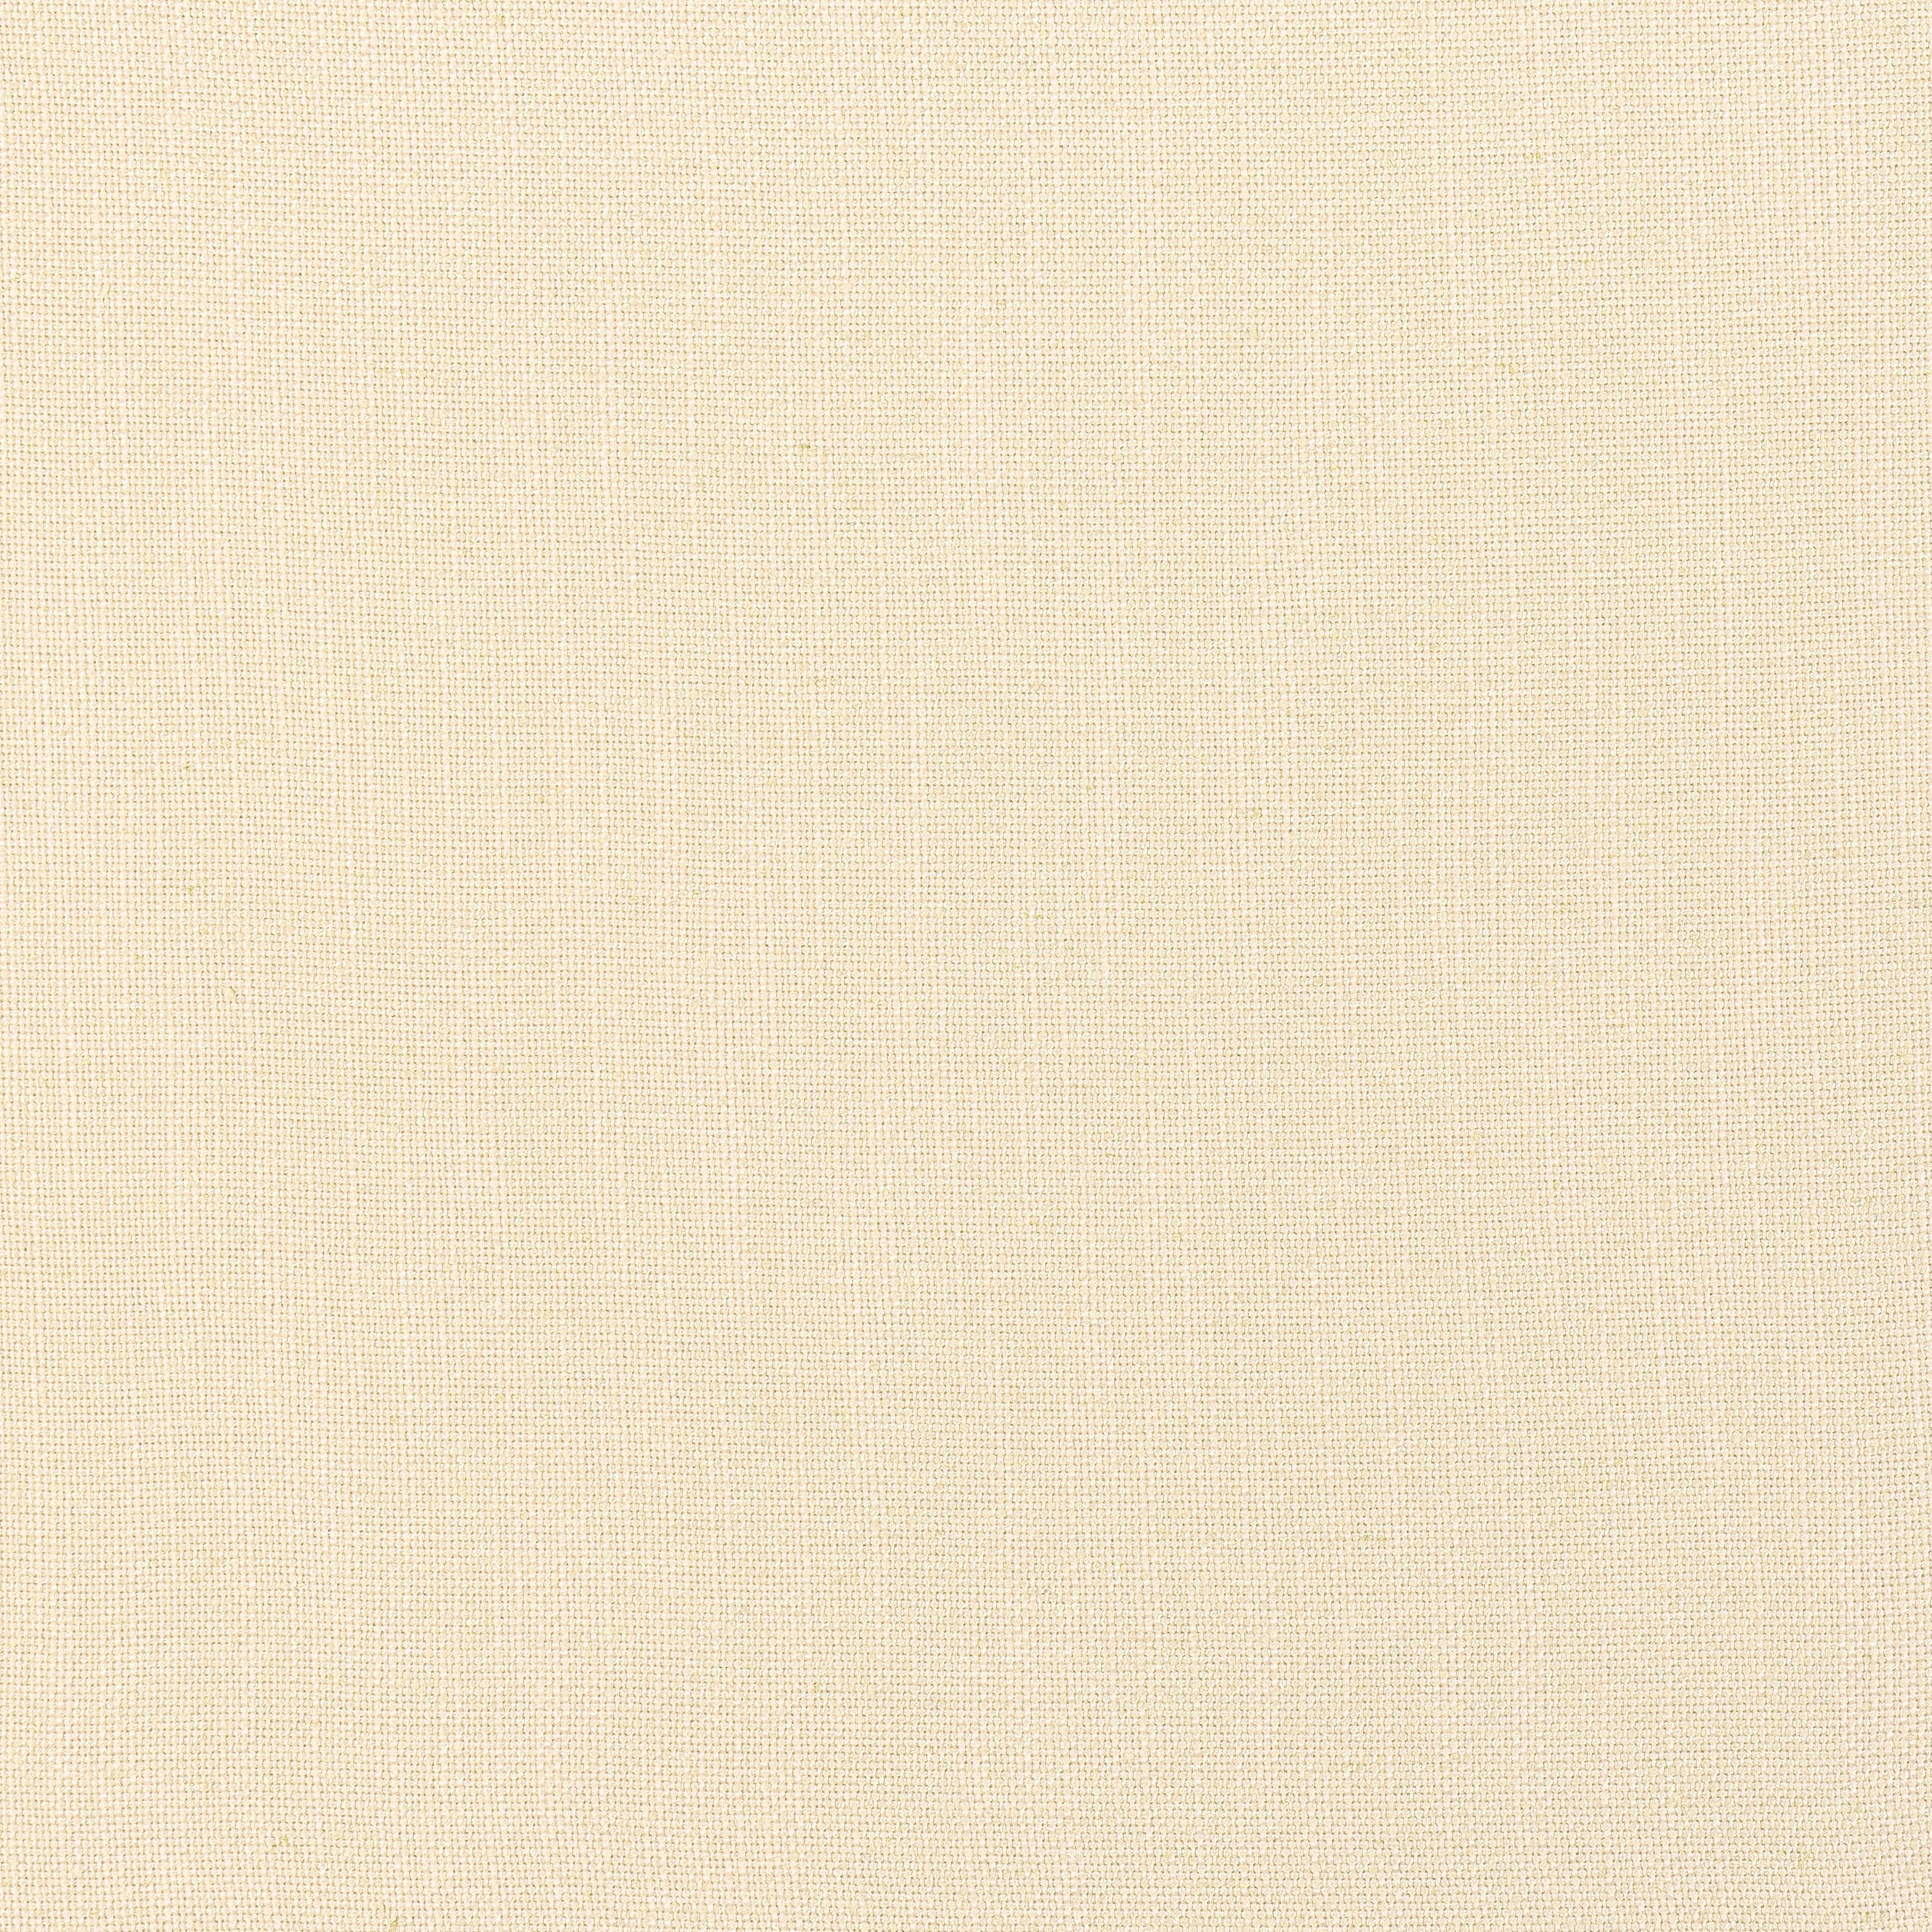 Palisade Linen fabric in almond color - pattern number FWW7631 - by Thibaut in the Palisades collection